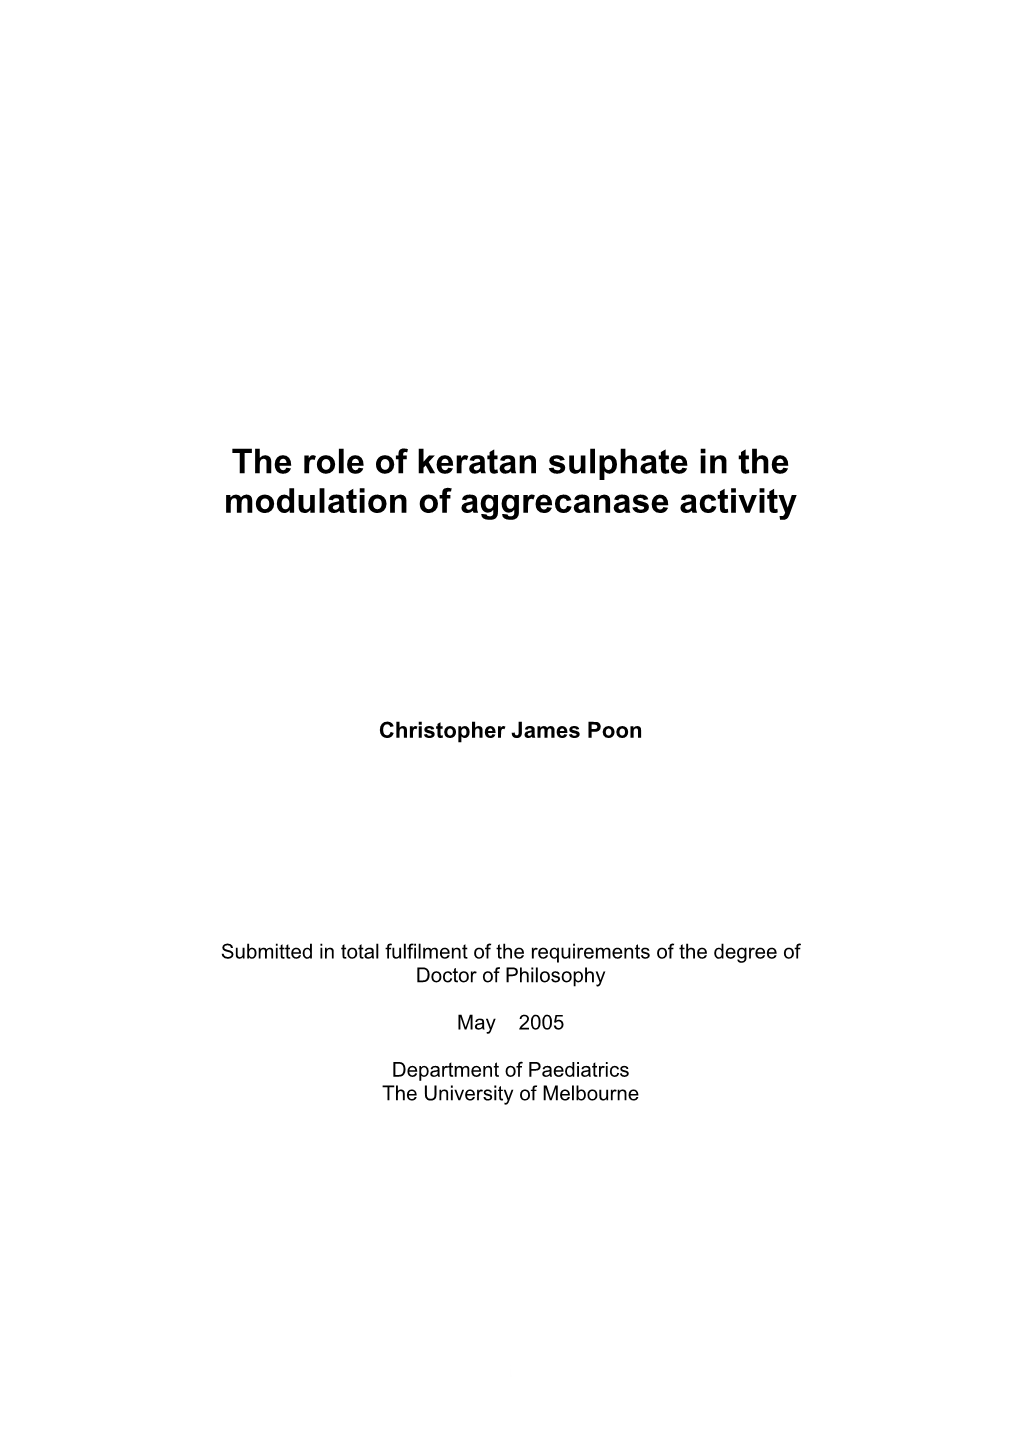 The Role of Keratan Sulphate in the Modulation of Aggrecanase Activity